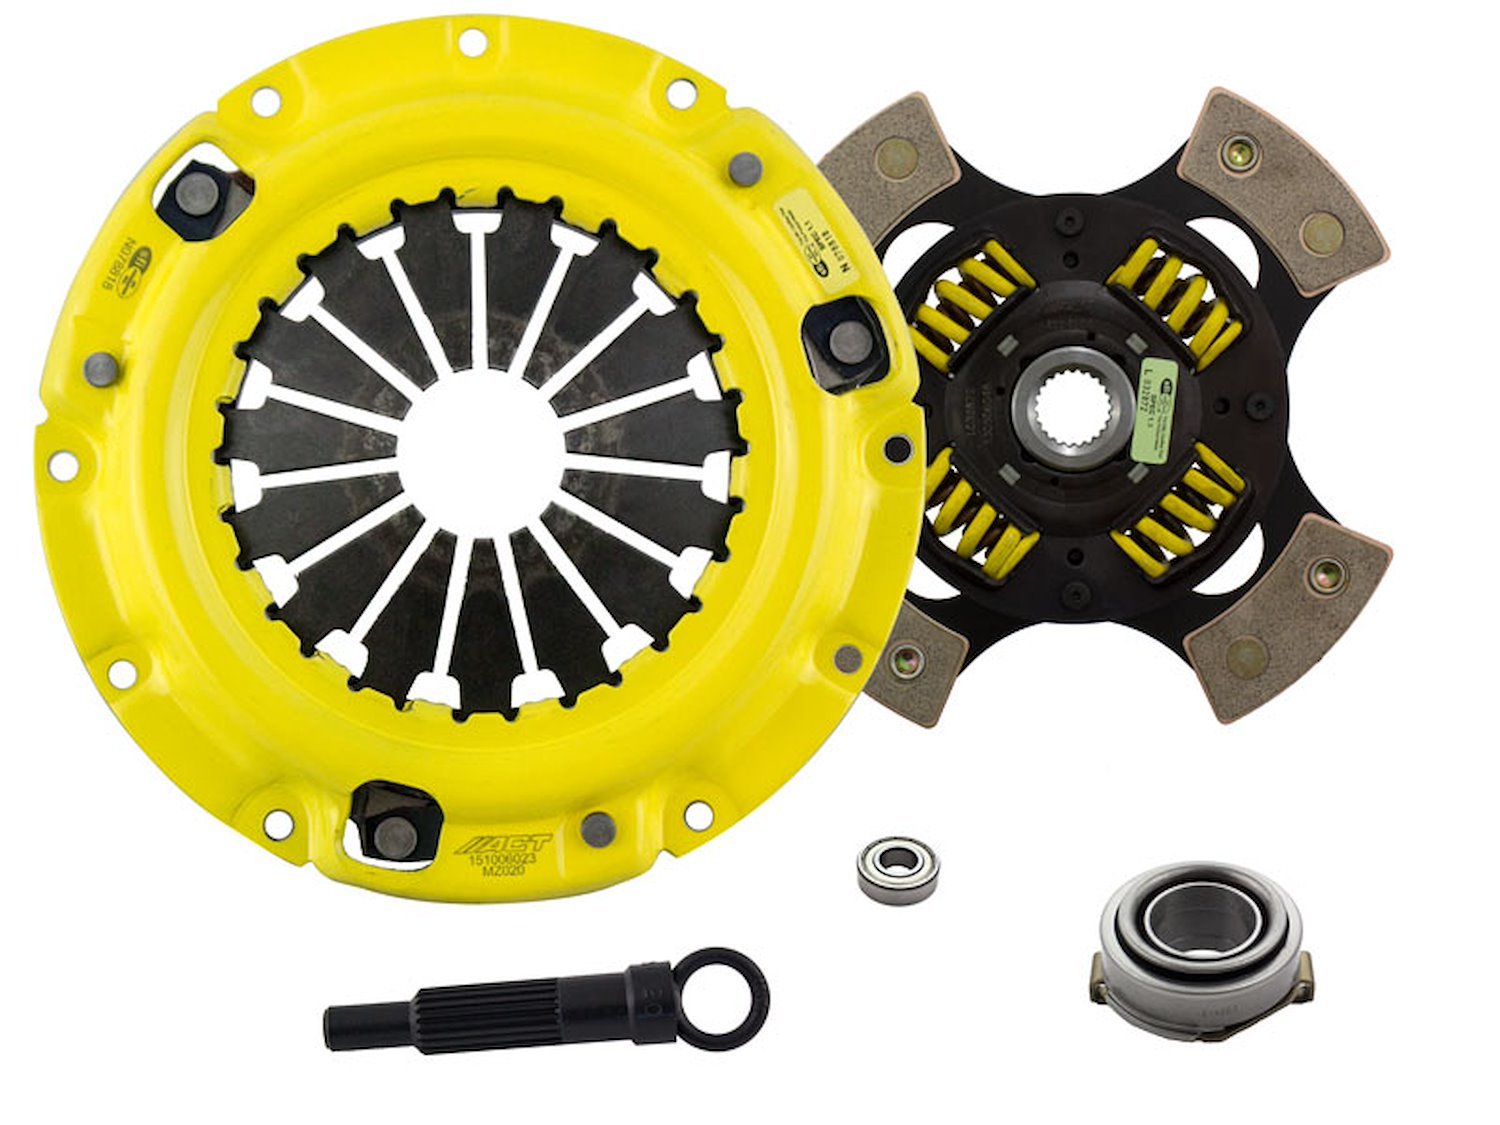 HD/Race Sprung 4-Pad Transmission Clutch Kit Fits Select